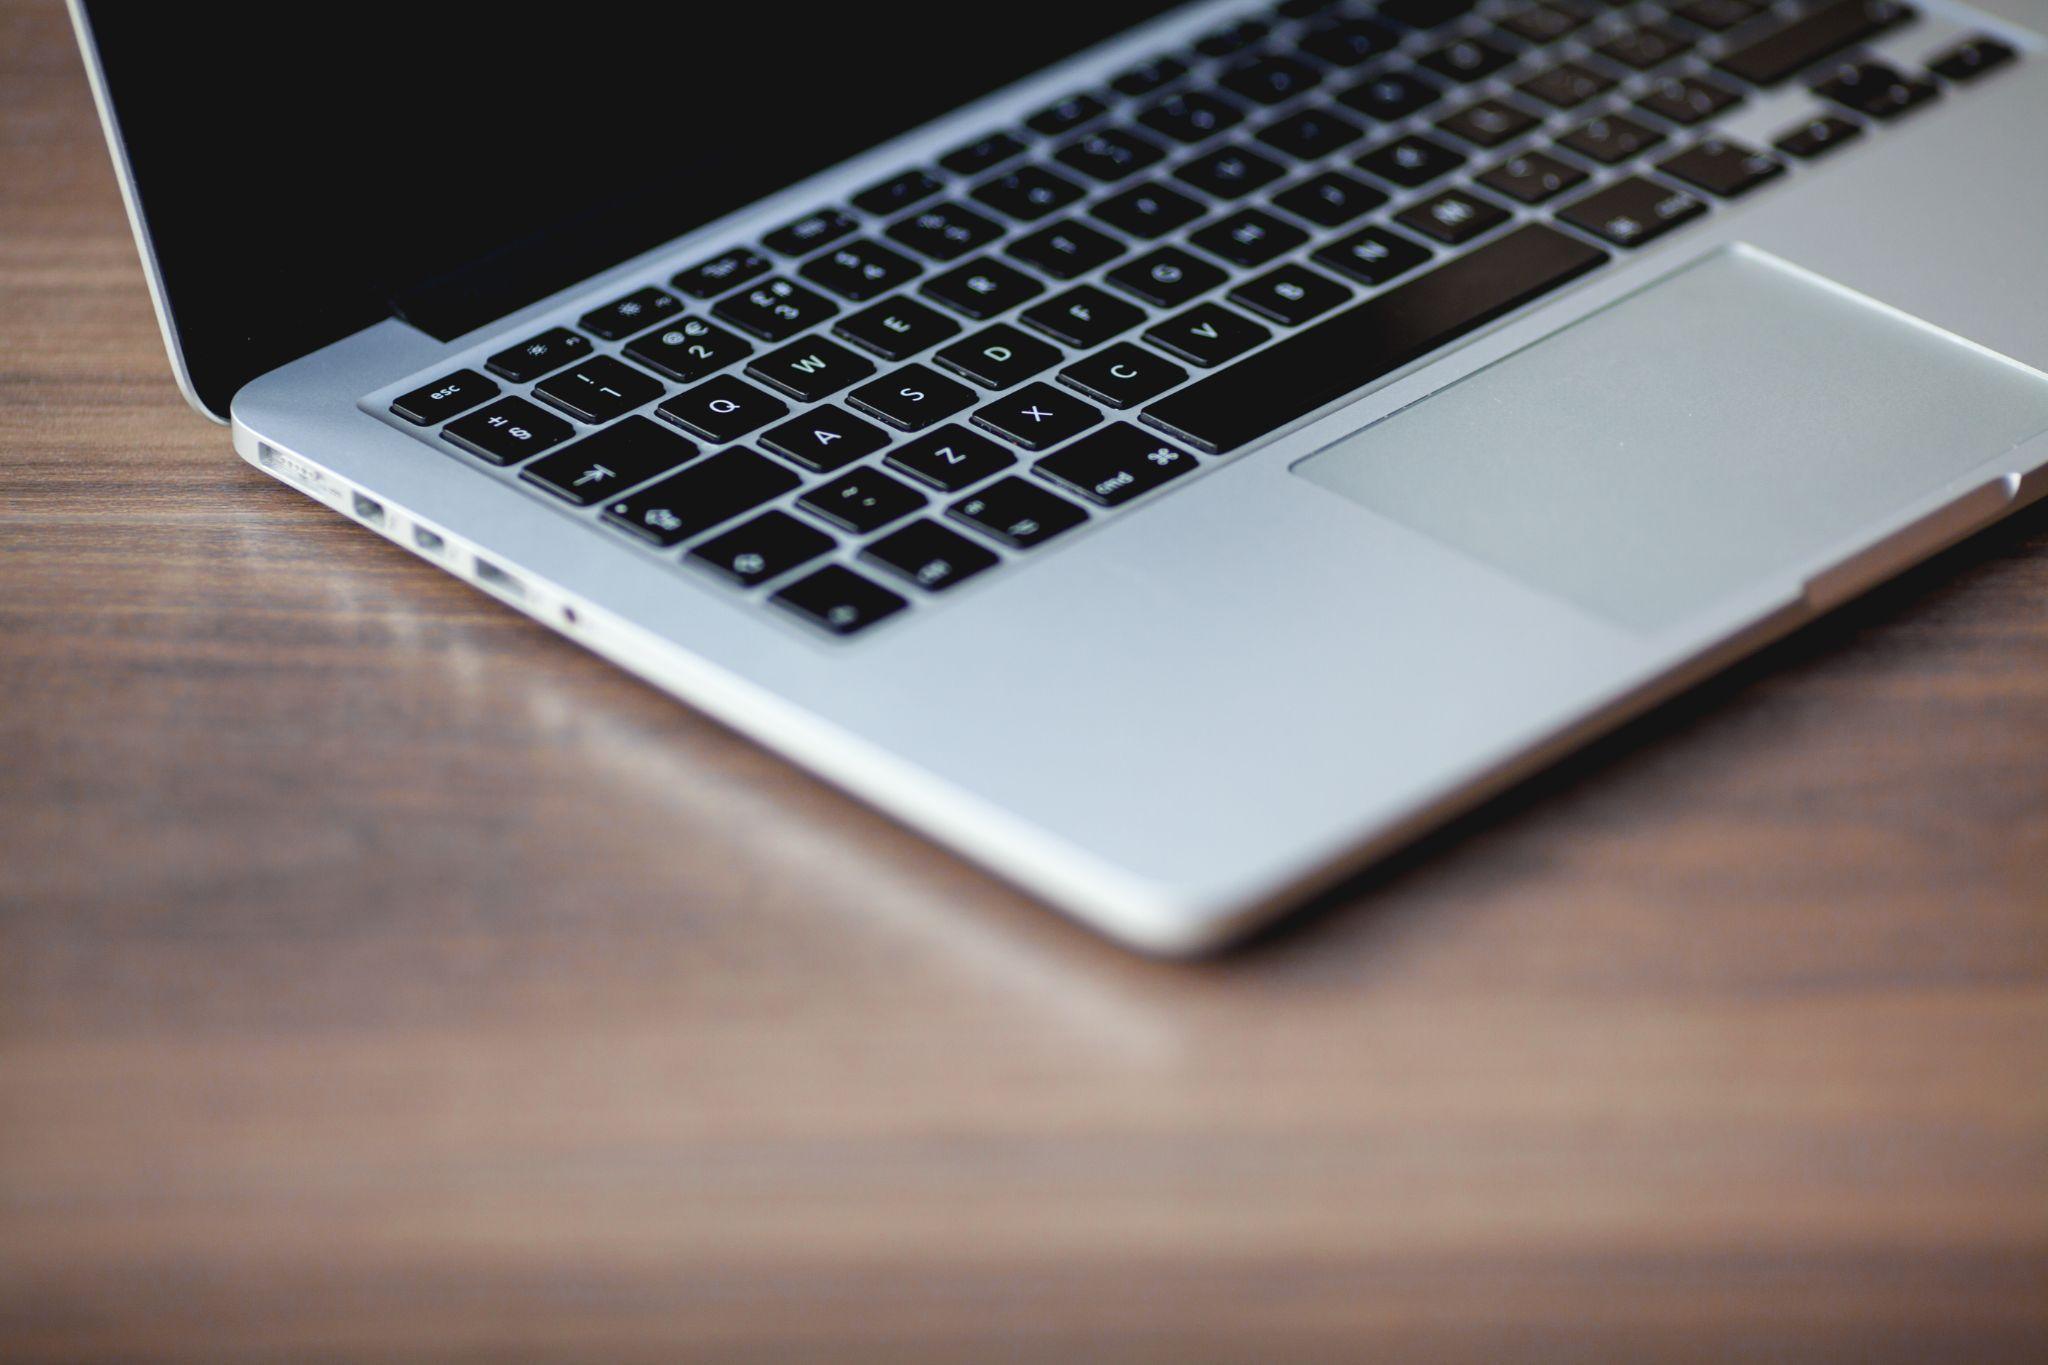 Changing trackpad settings on your Mac